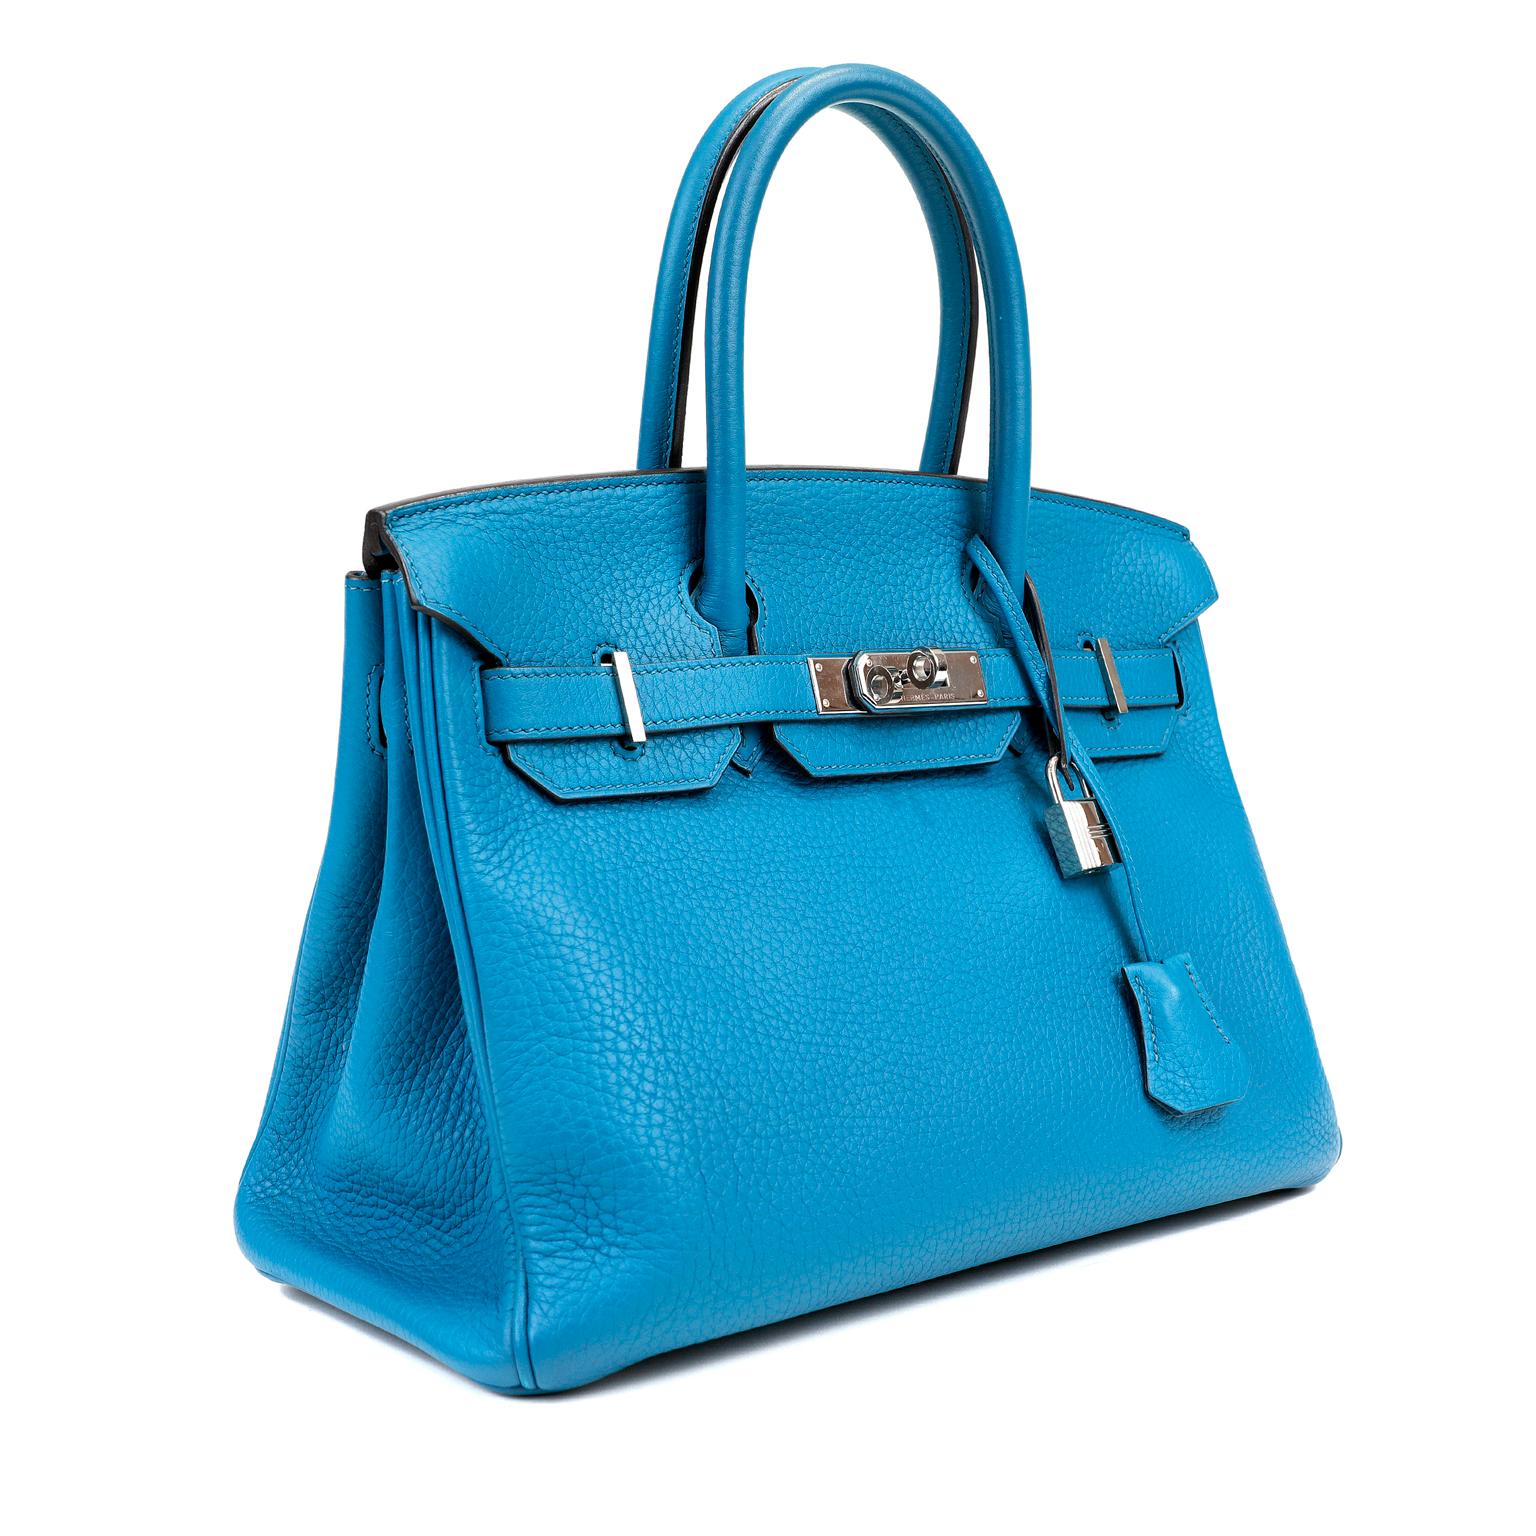 This authentic Hermès Blue Turquoise Togo  30 cm Birkin is in excellent condition.  Hand stitched by skilled craftsmen, wait lists of a year or more are not uncommon for the Hermès Birkin. 
Togo is highly desirable scratch resistant calf leather; it